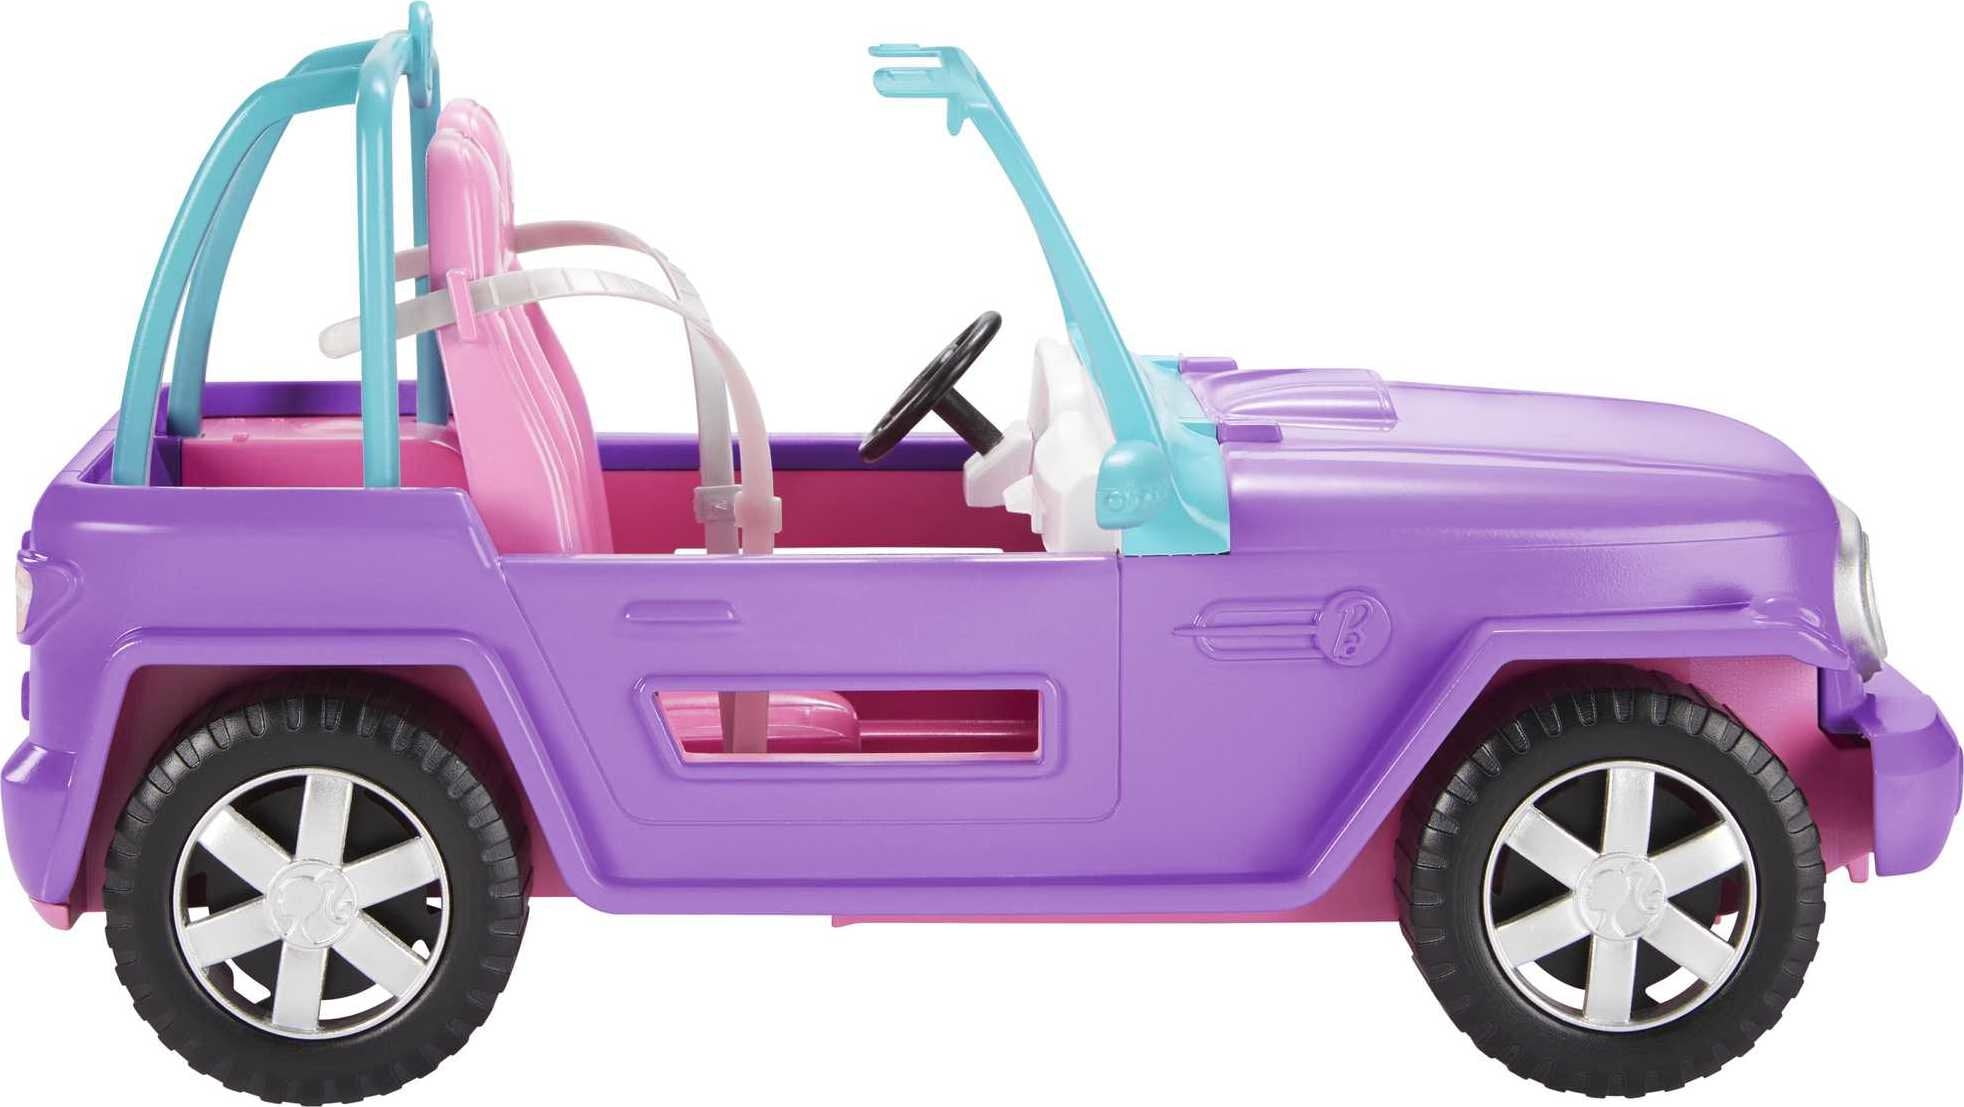 Barbie Off-Road Vehicle, Purple Toy Car with 2 Pink Seats and Rolling Wheels